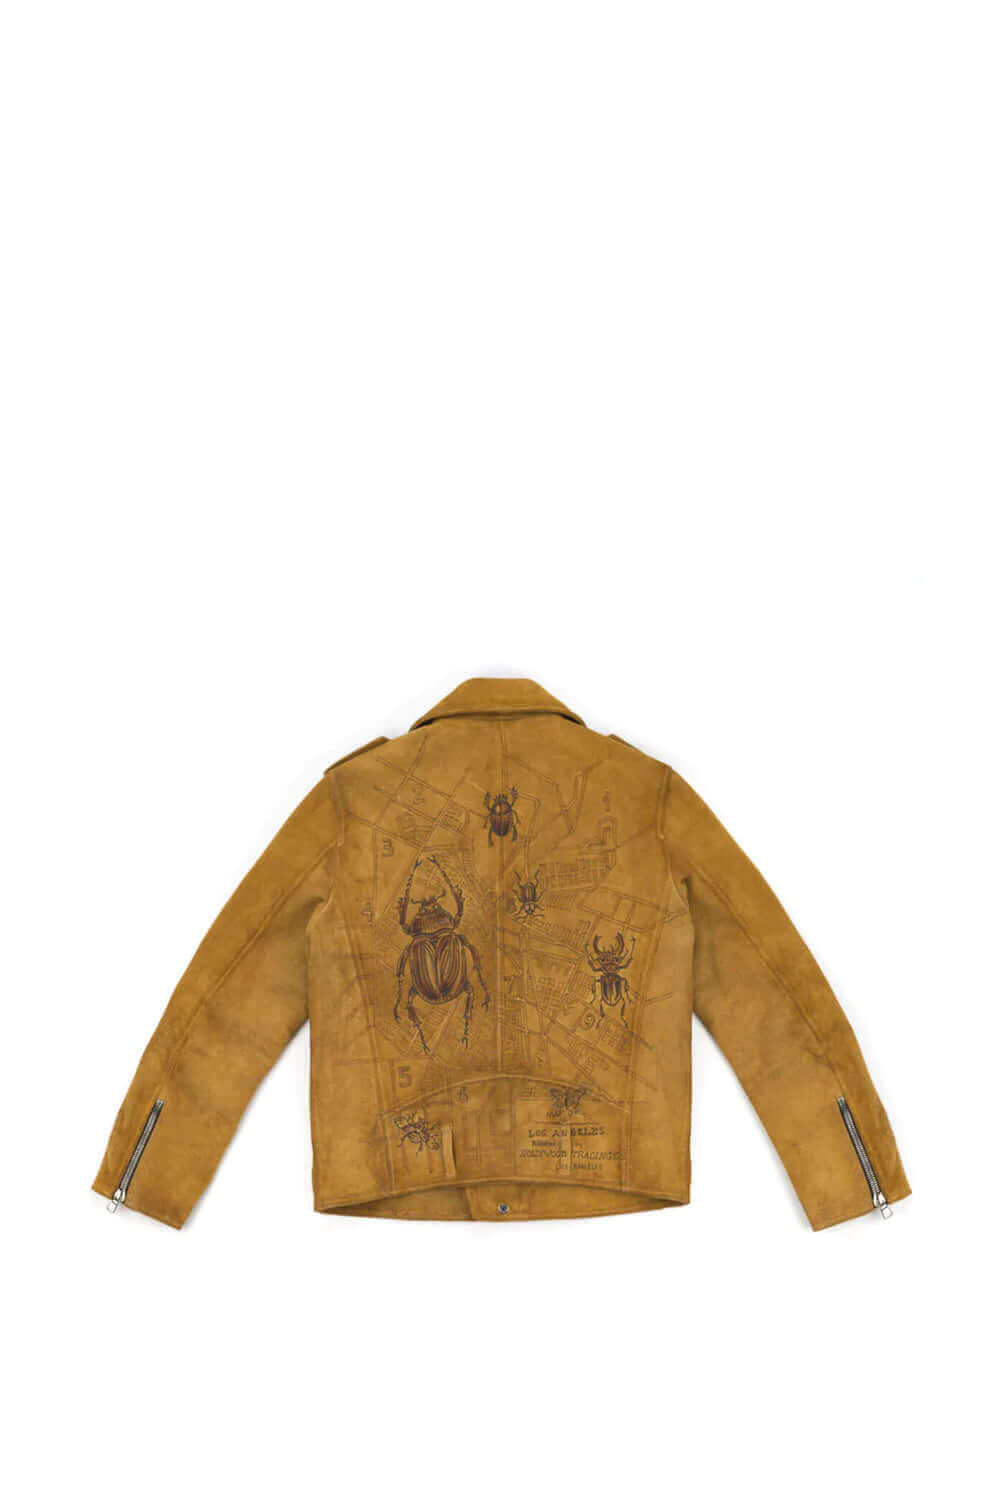 DUSTIN SUEDE L.A. JACKET Cognac suede jacket, asymmetrical zip closure. Three frontal pockets. Zipped sleeves. Hand-painted details on the back. Made in Italy. HTC LOS ANGELES